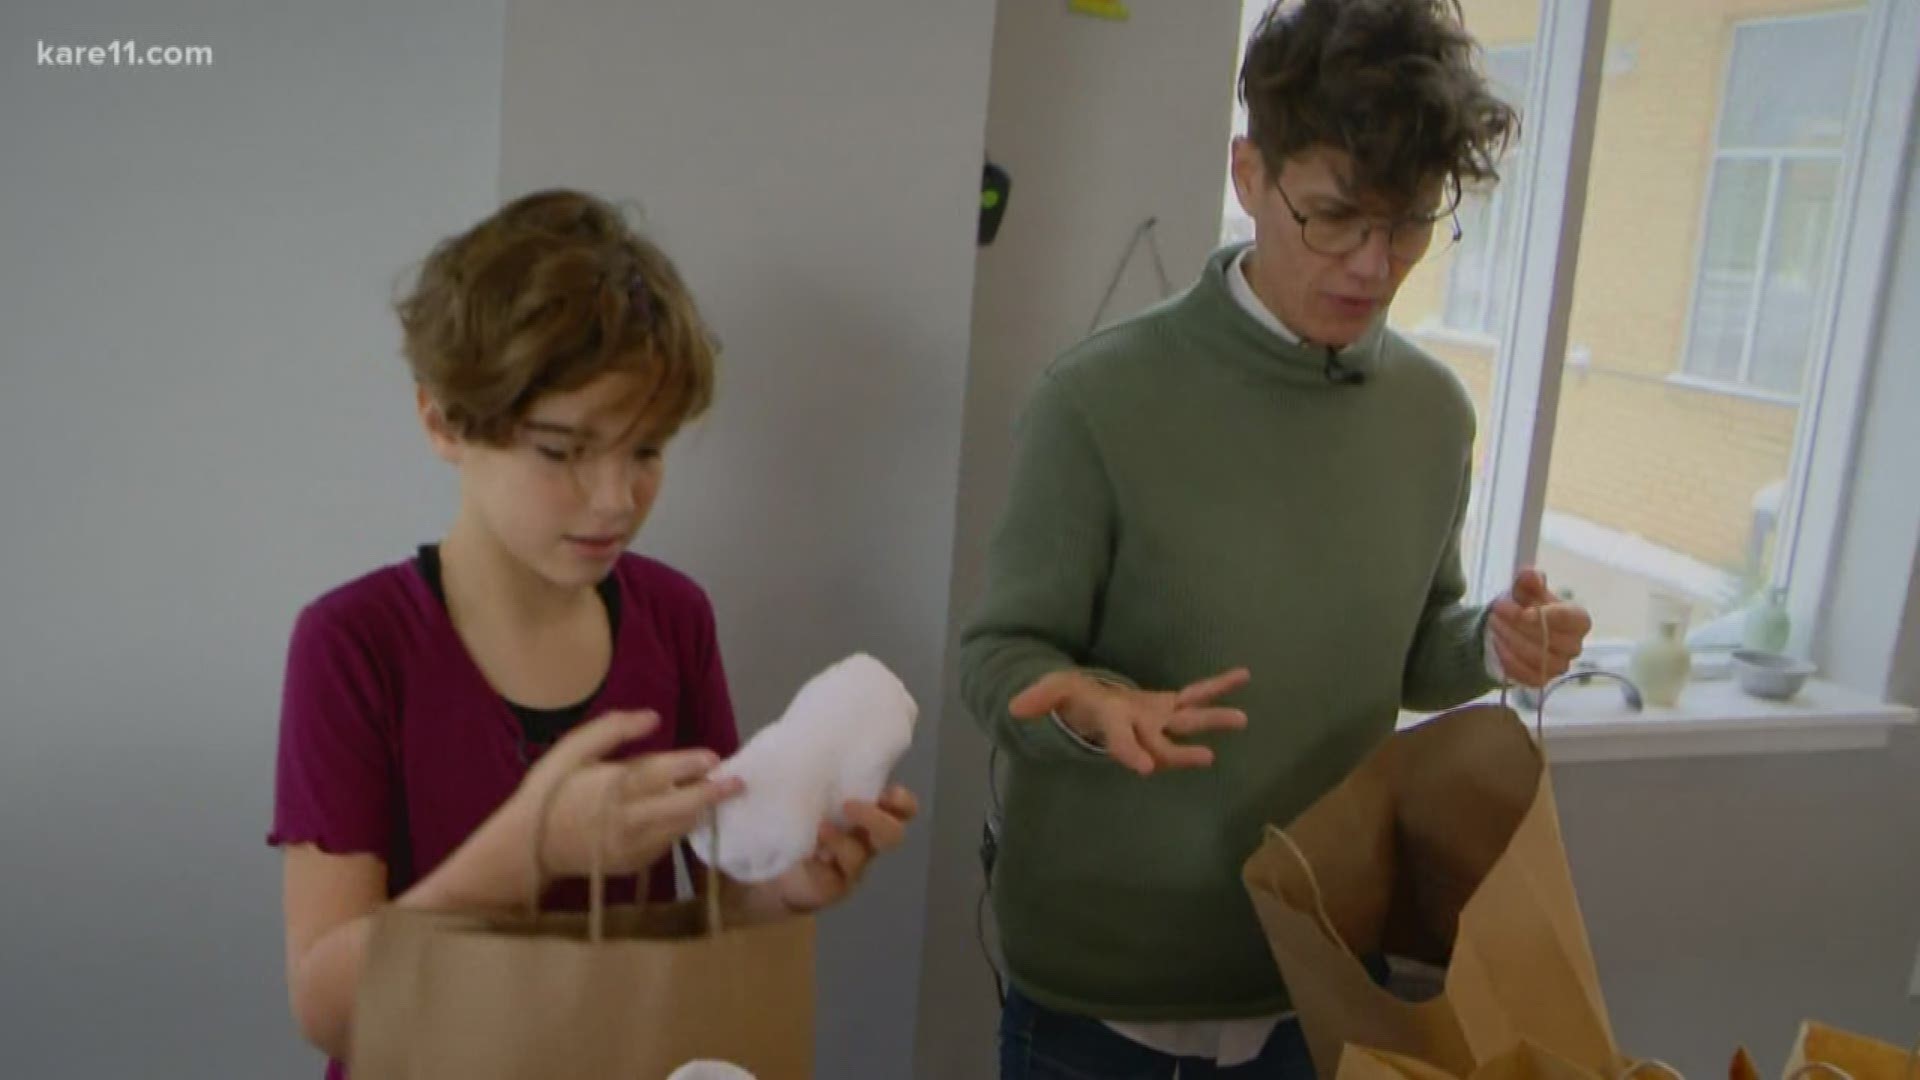 Local fourth-grader makes homeless kits for people in need.